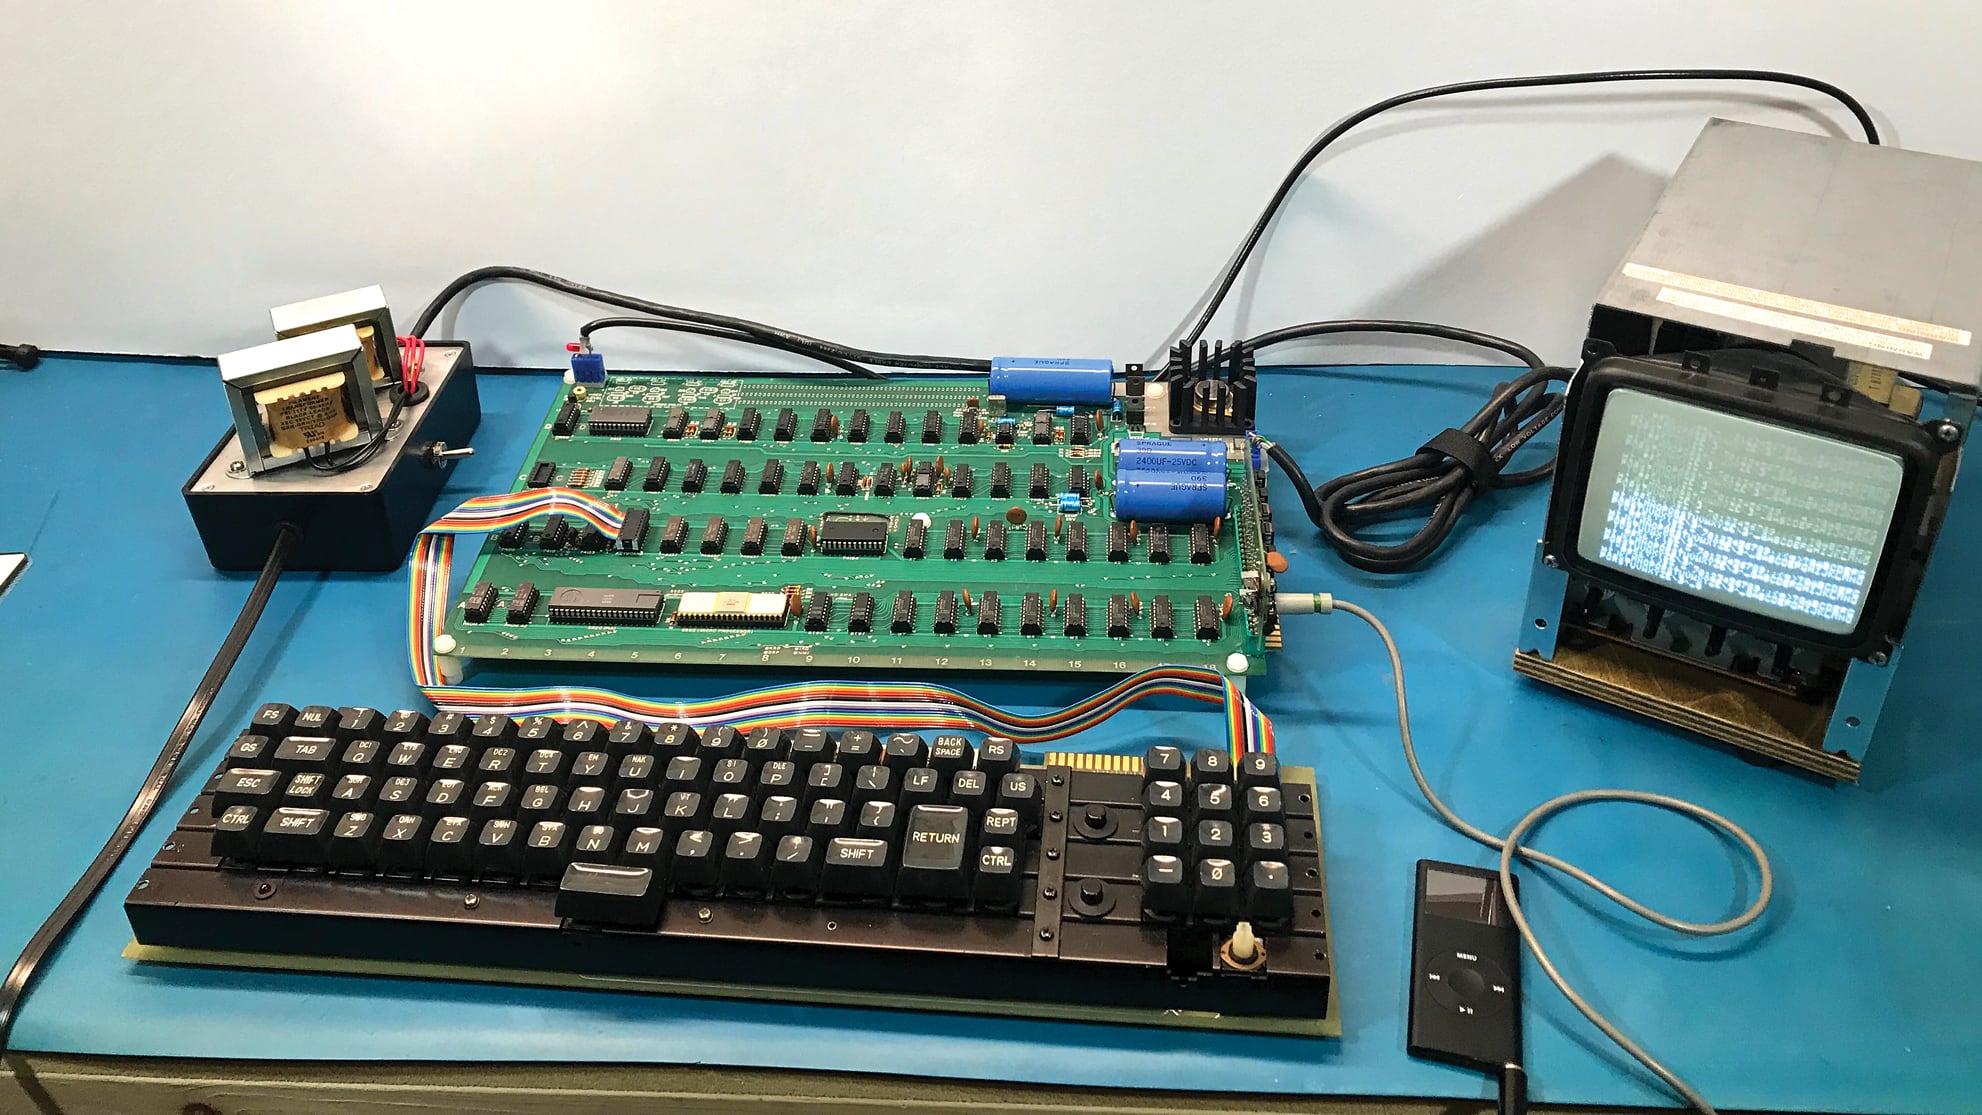 Apple-1 Computer Hand-Numbered by Steve Jobs Sells for Over $440,000 at Auction